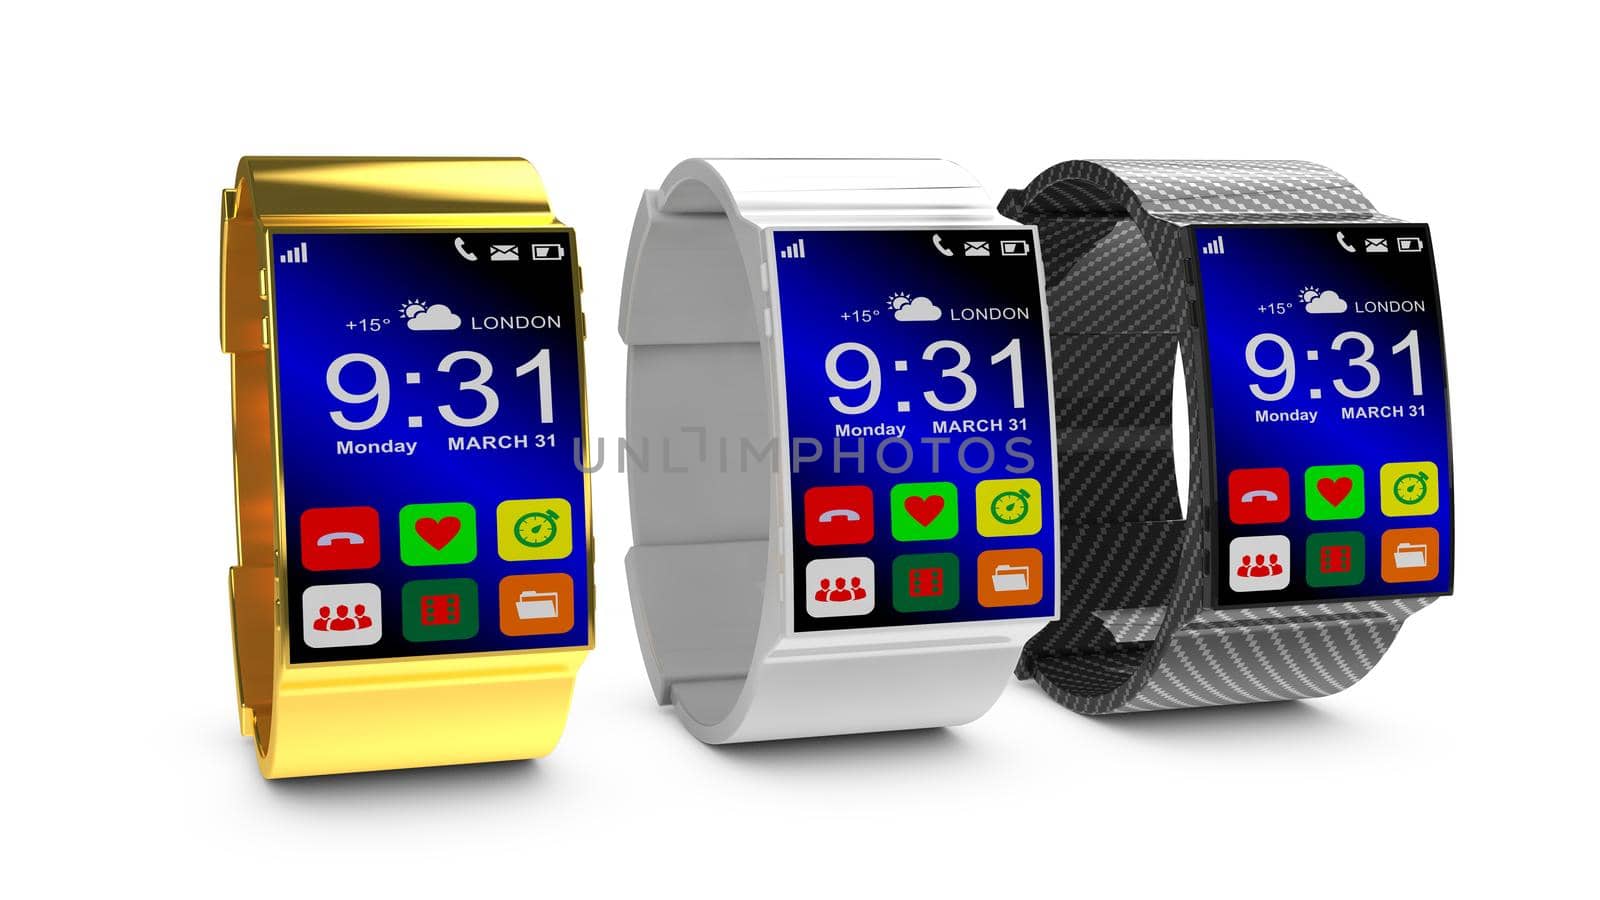 smart watches in gold, white and carbon design